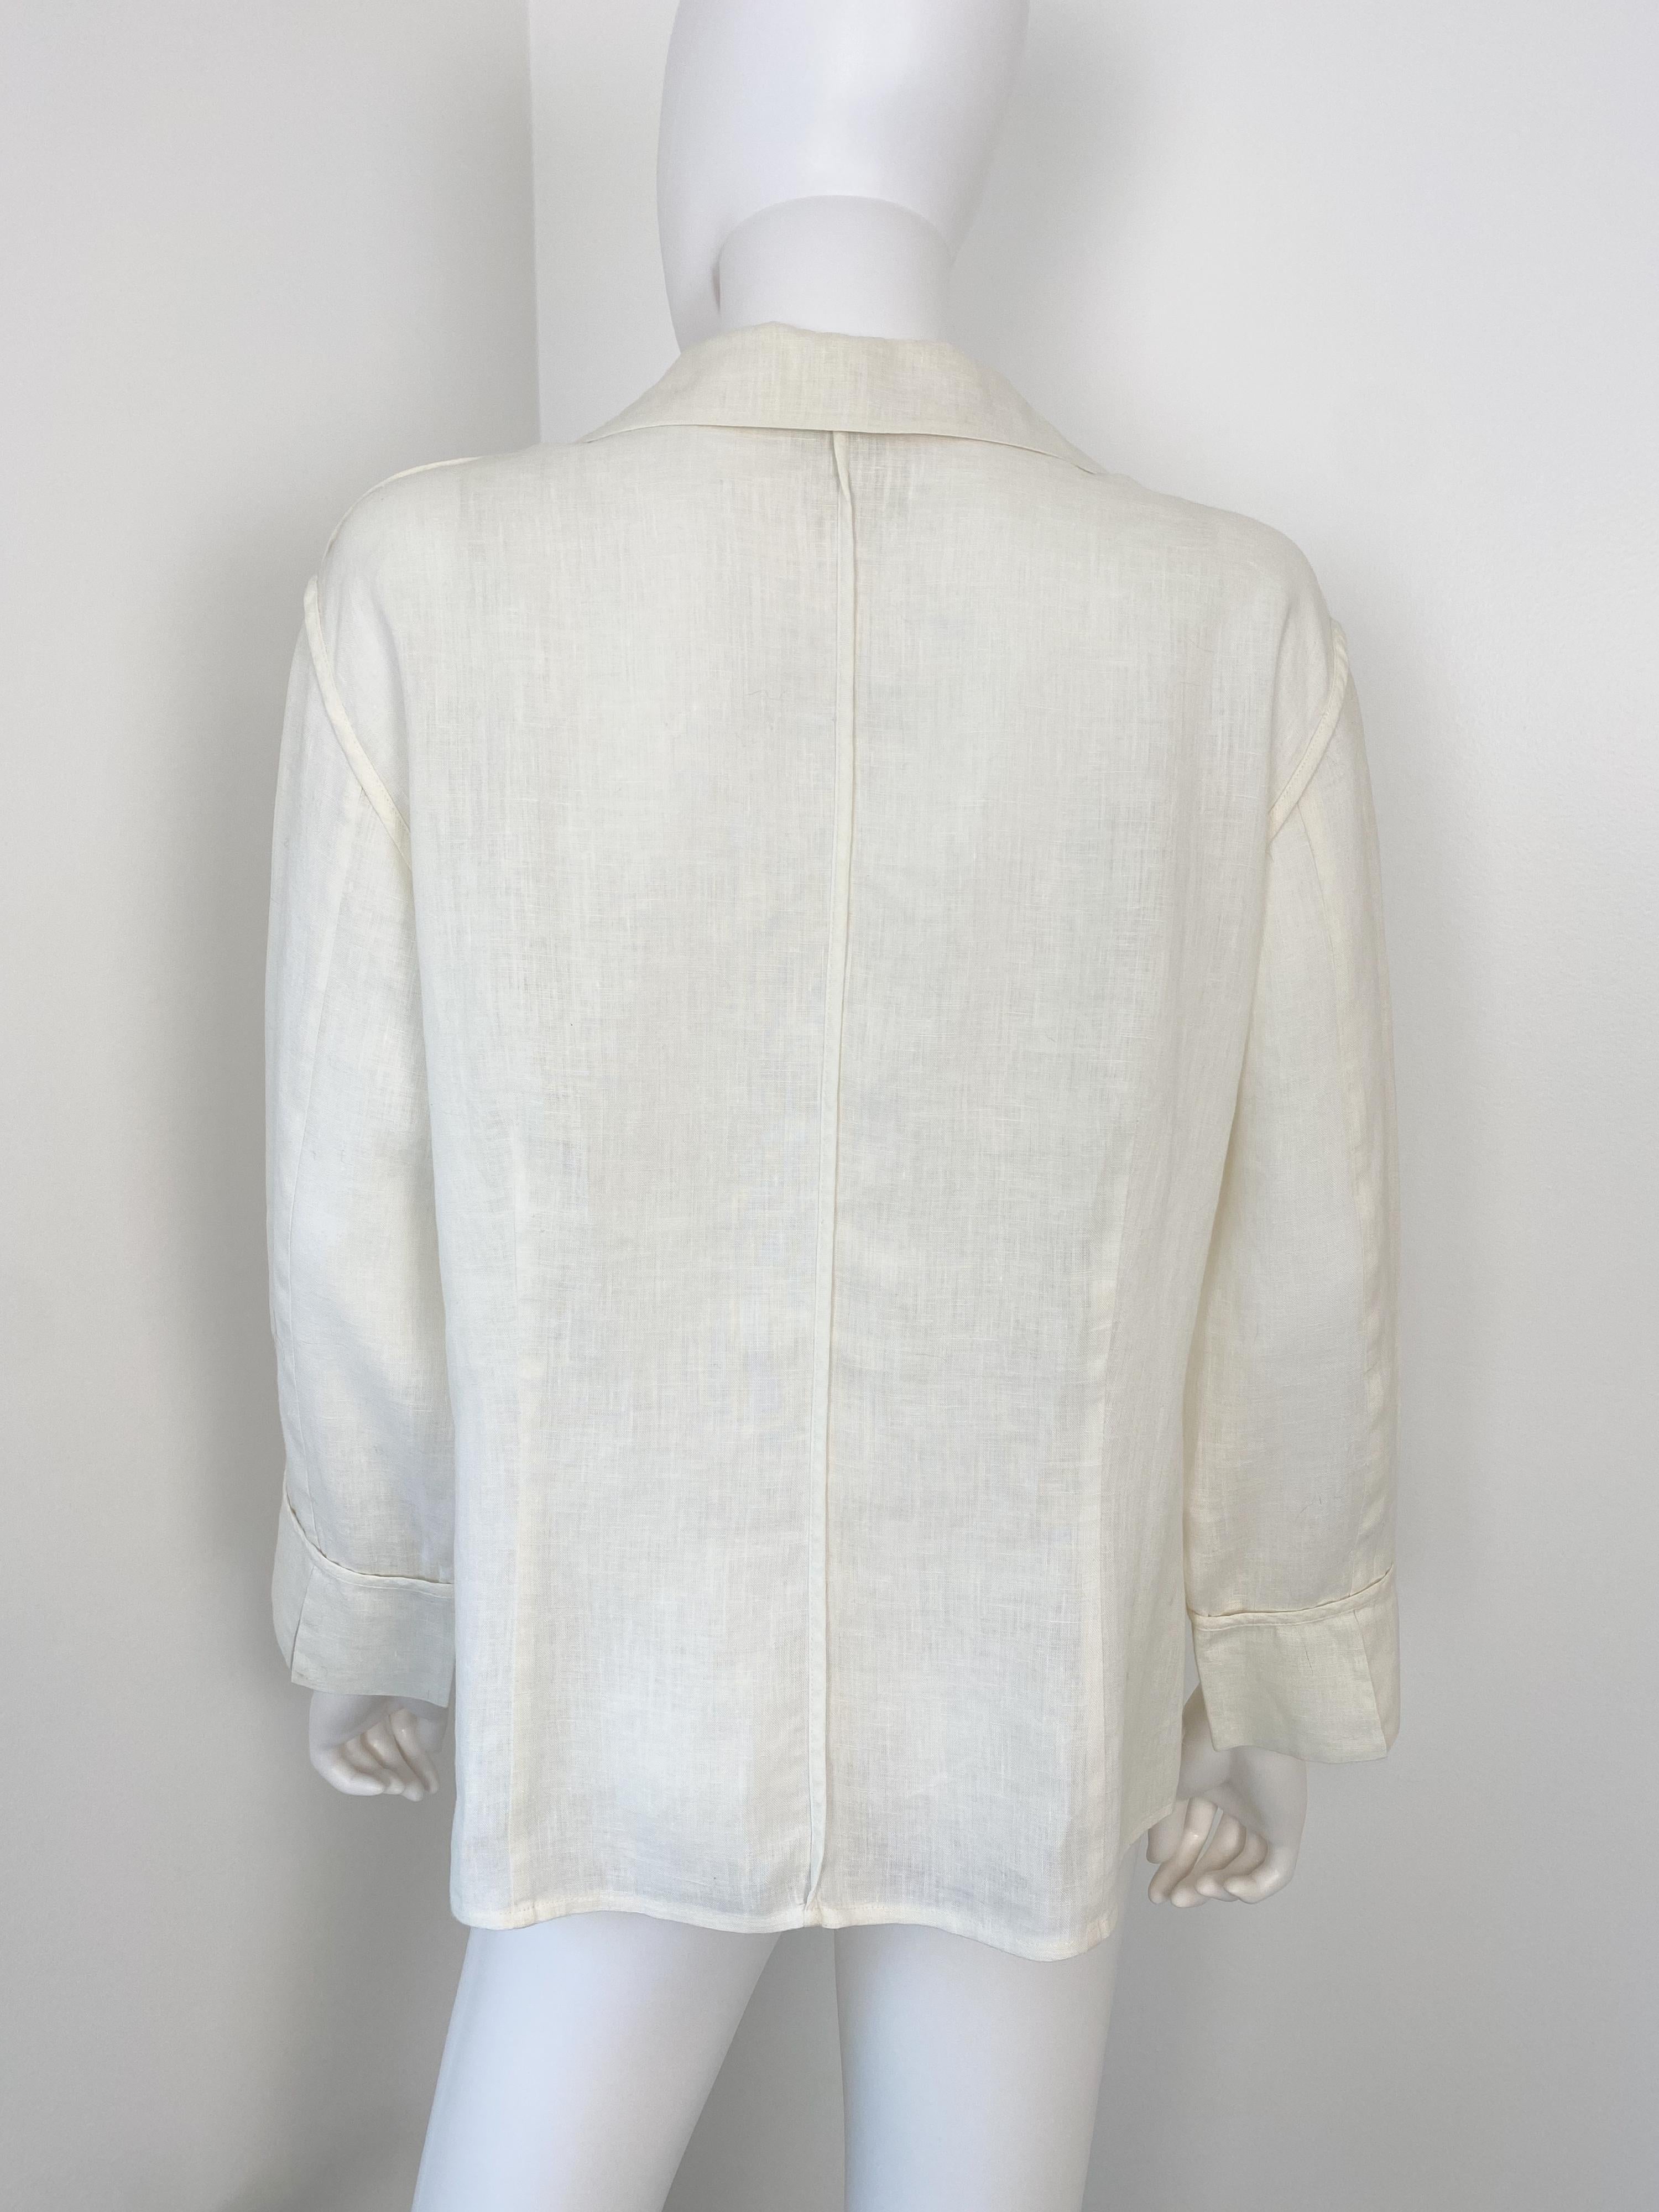 Vintage 1990s Louis Feraud Linen and Cotton Blouse Top with Embroidery Size L For Sale 6